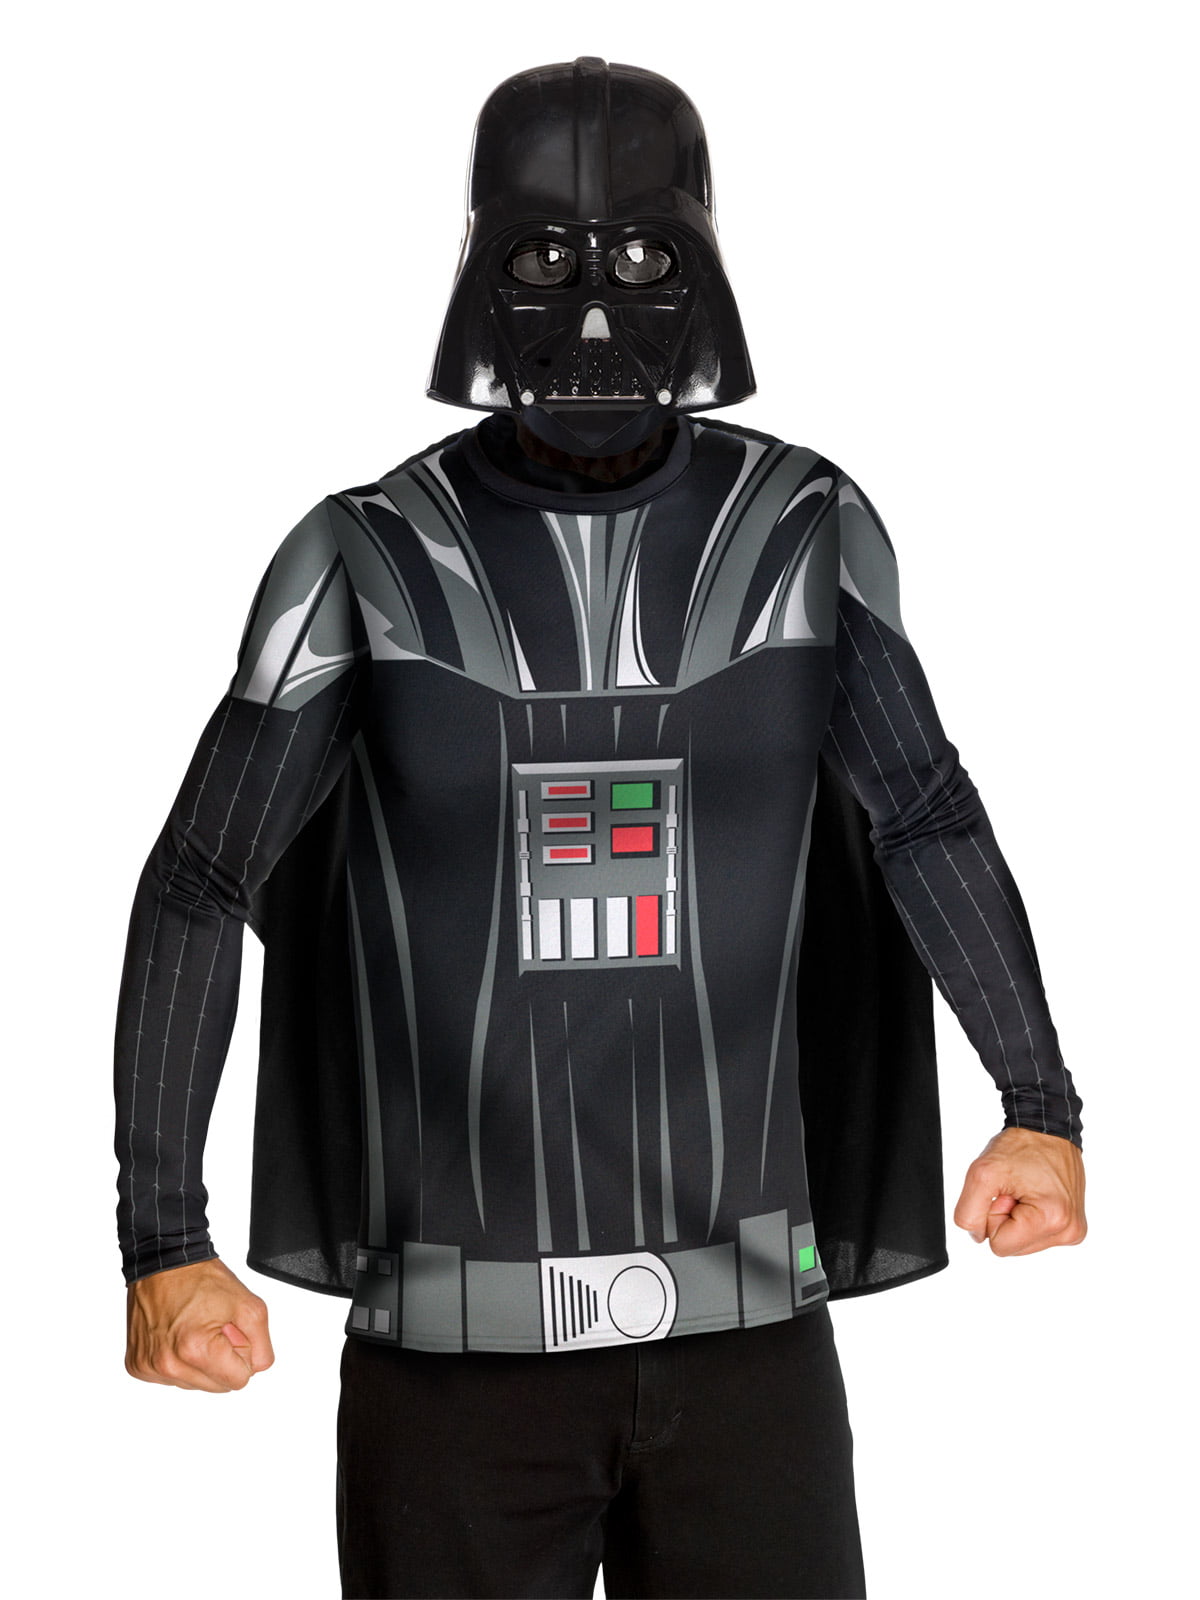 Featured image for “DARTH VADER DRESS UPS: CLASSIC LONG SLEEVE TOPS”